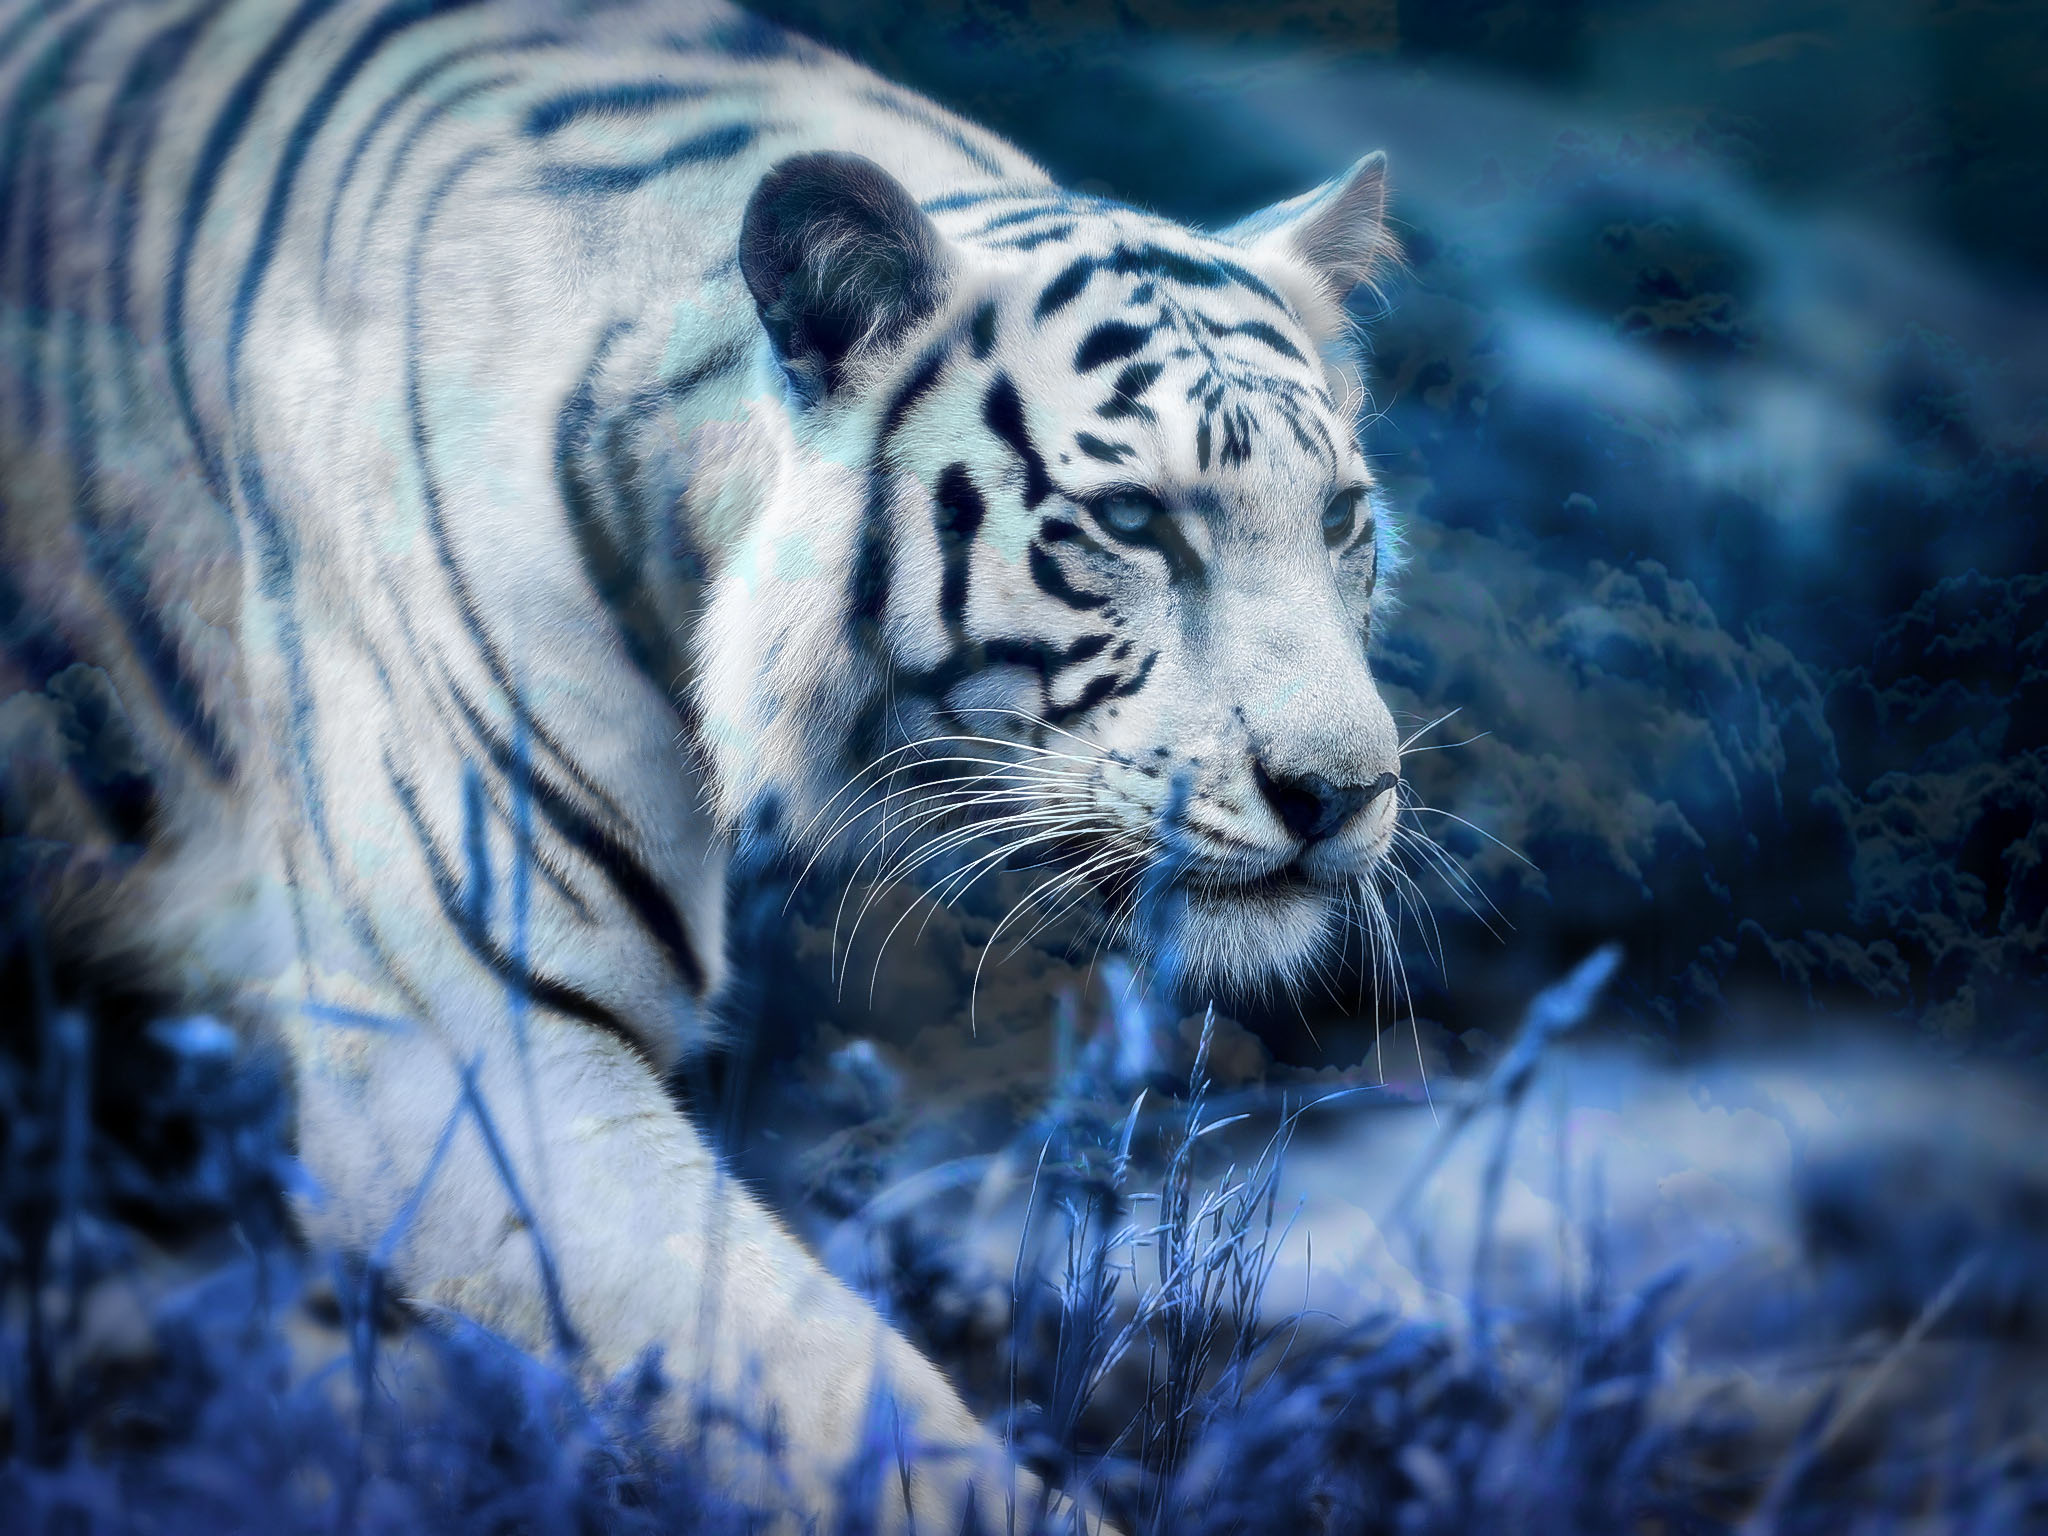 Tiger Blue wallpaper by sa3dmm  Download on ZEDGE  09b6